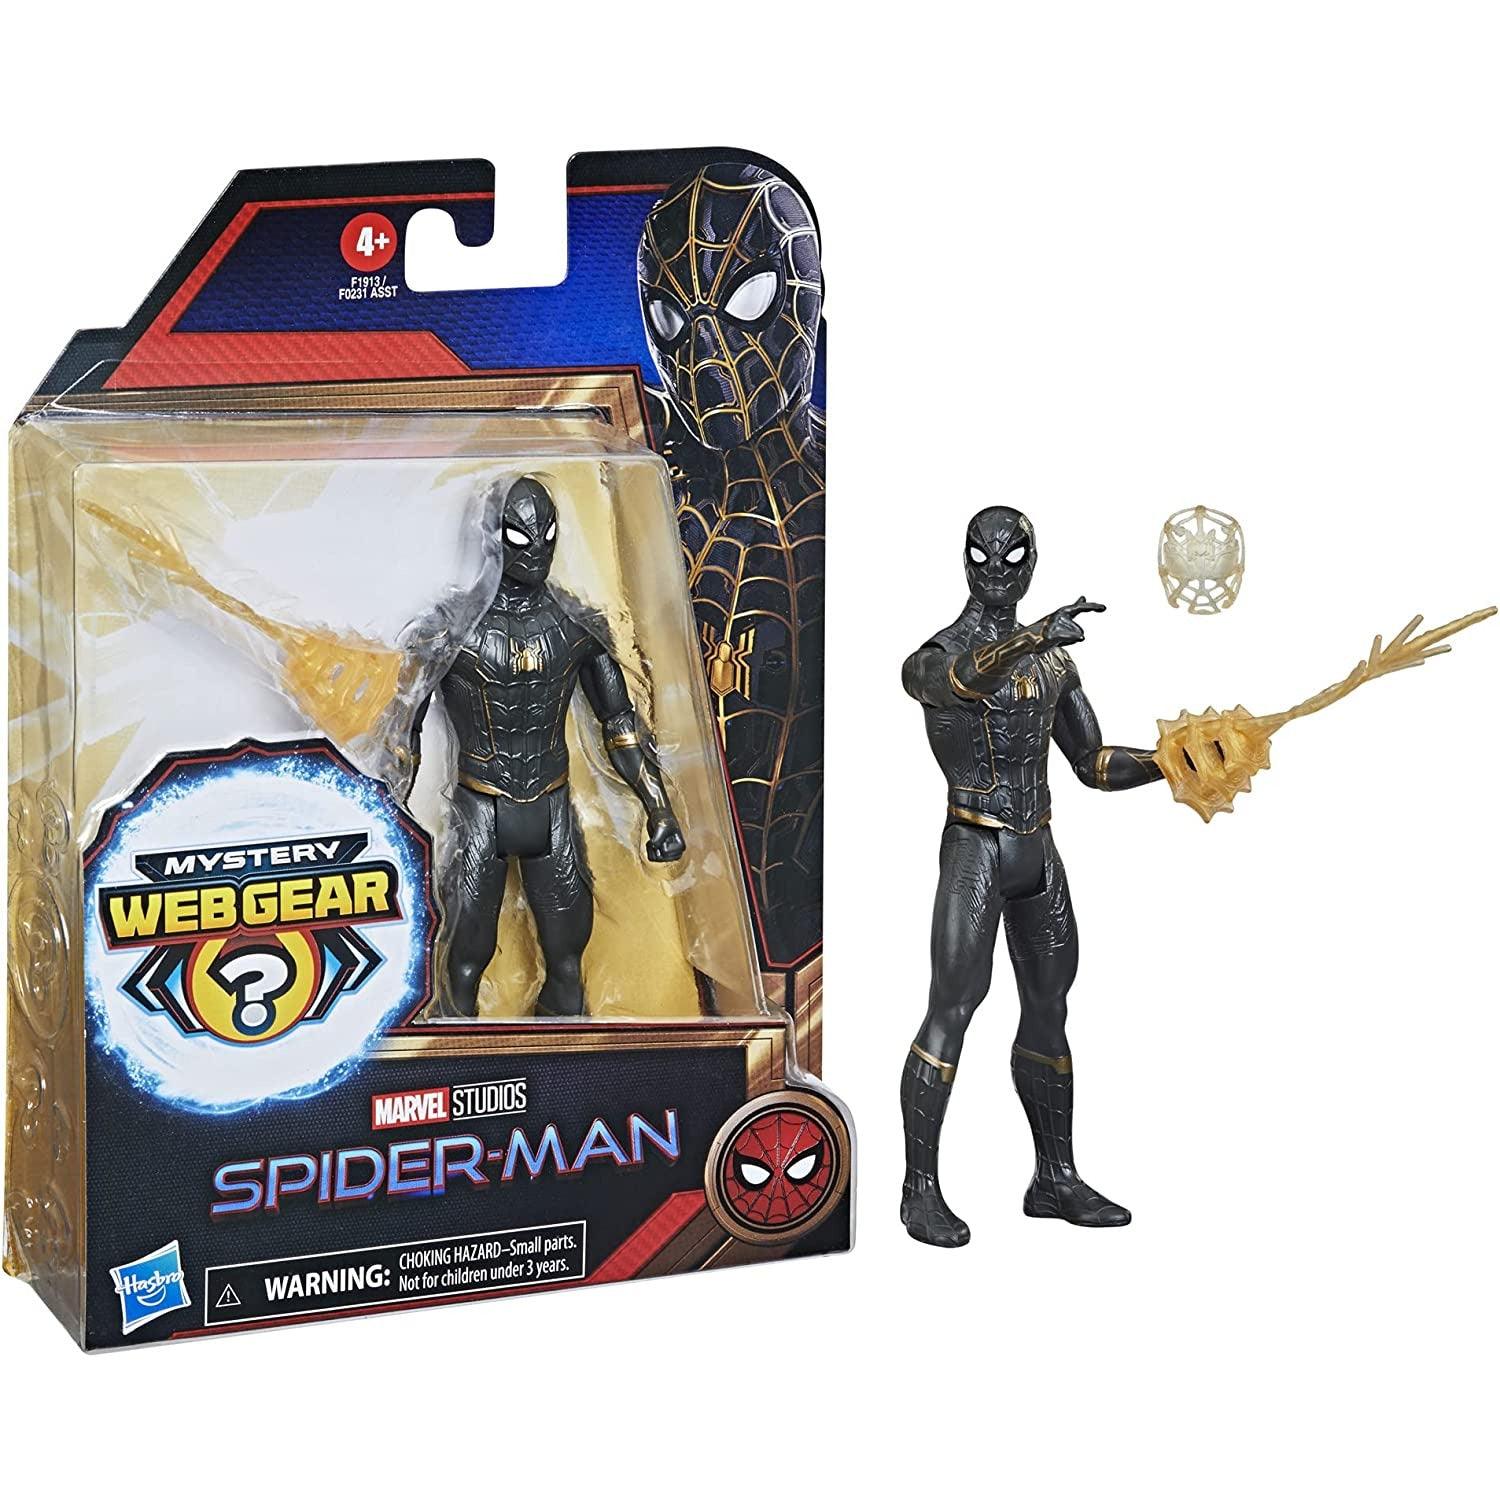 Hasbro Marvel Studios Spider-Man Mystery Web Gear Black and Gold Suit Action Figure - 6-Inch - BumbleToys - 5-7 Years, Action Figures, Avengers, Boys, Eagle Plus